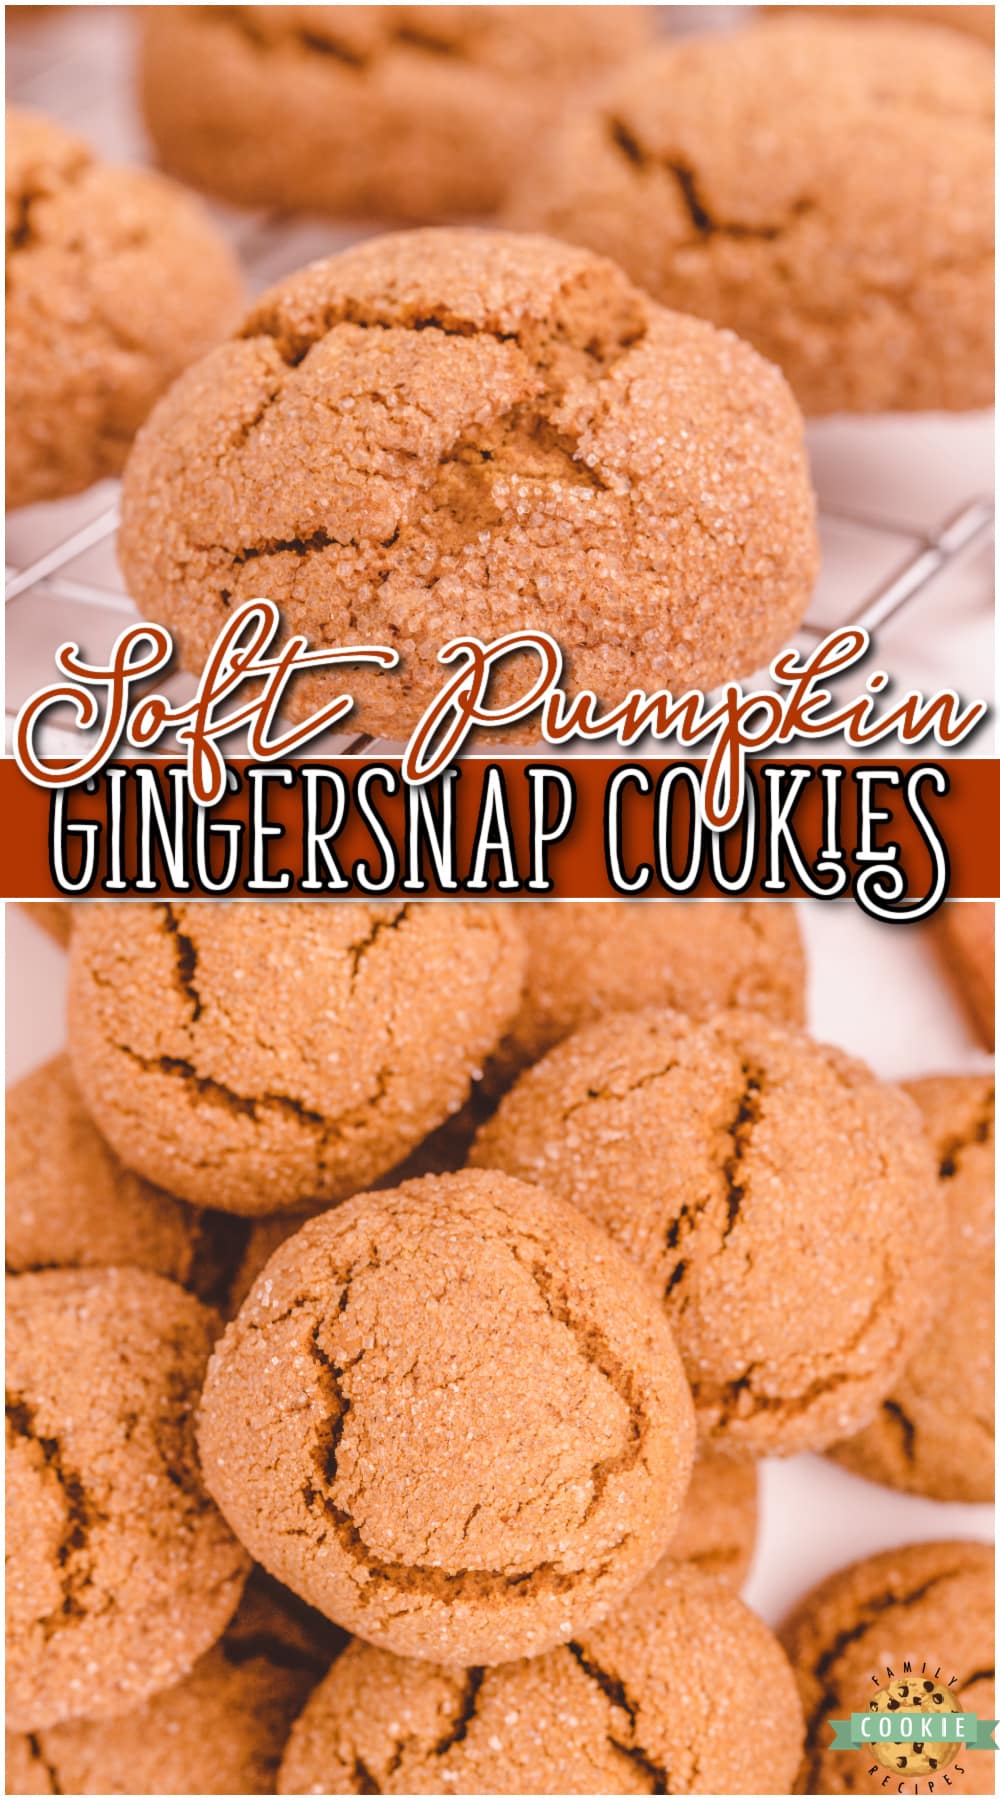 Soft Pumpkin Gingersnap Cookies are wonderfully spiced pumpkin cookies with amazing ginger flavor! Making these pumpkin ginger cookies is simple & everyone loves the soft, chewy texture.